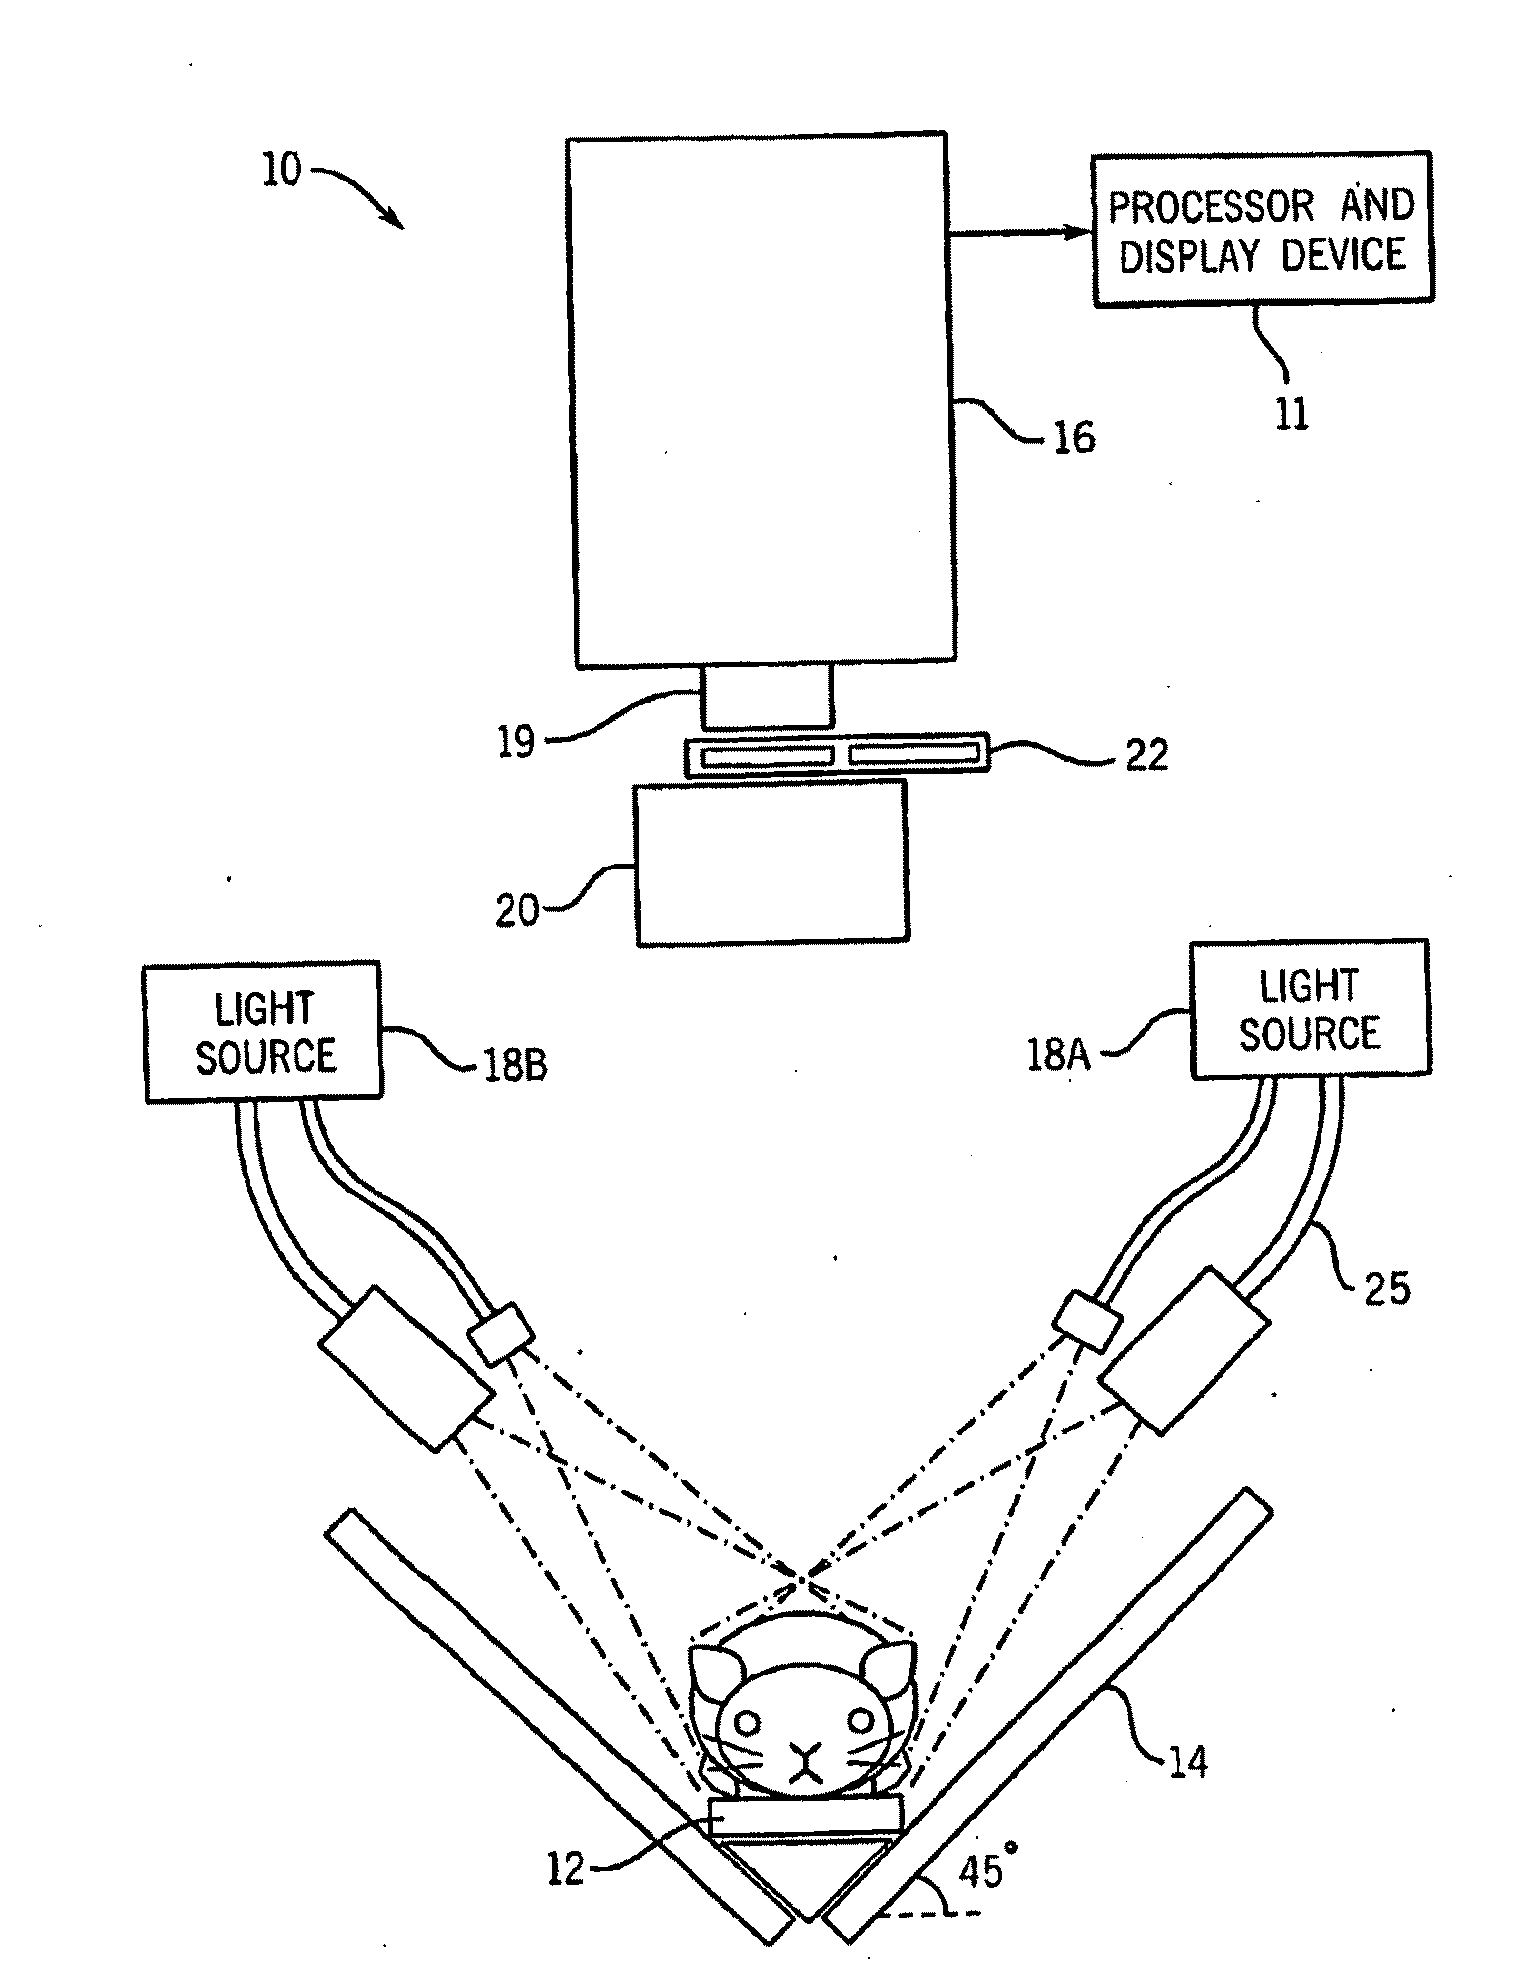 In-vivo optical imaging method including analysis of dynamic images